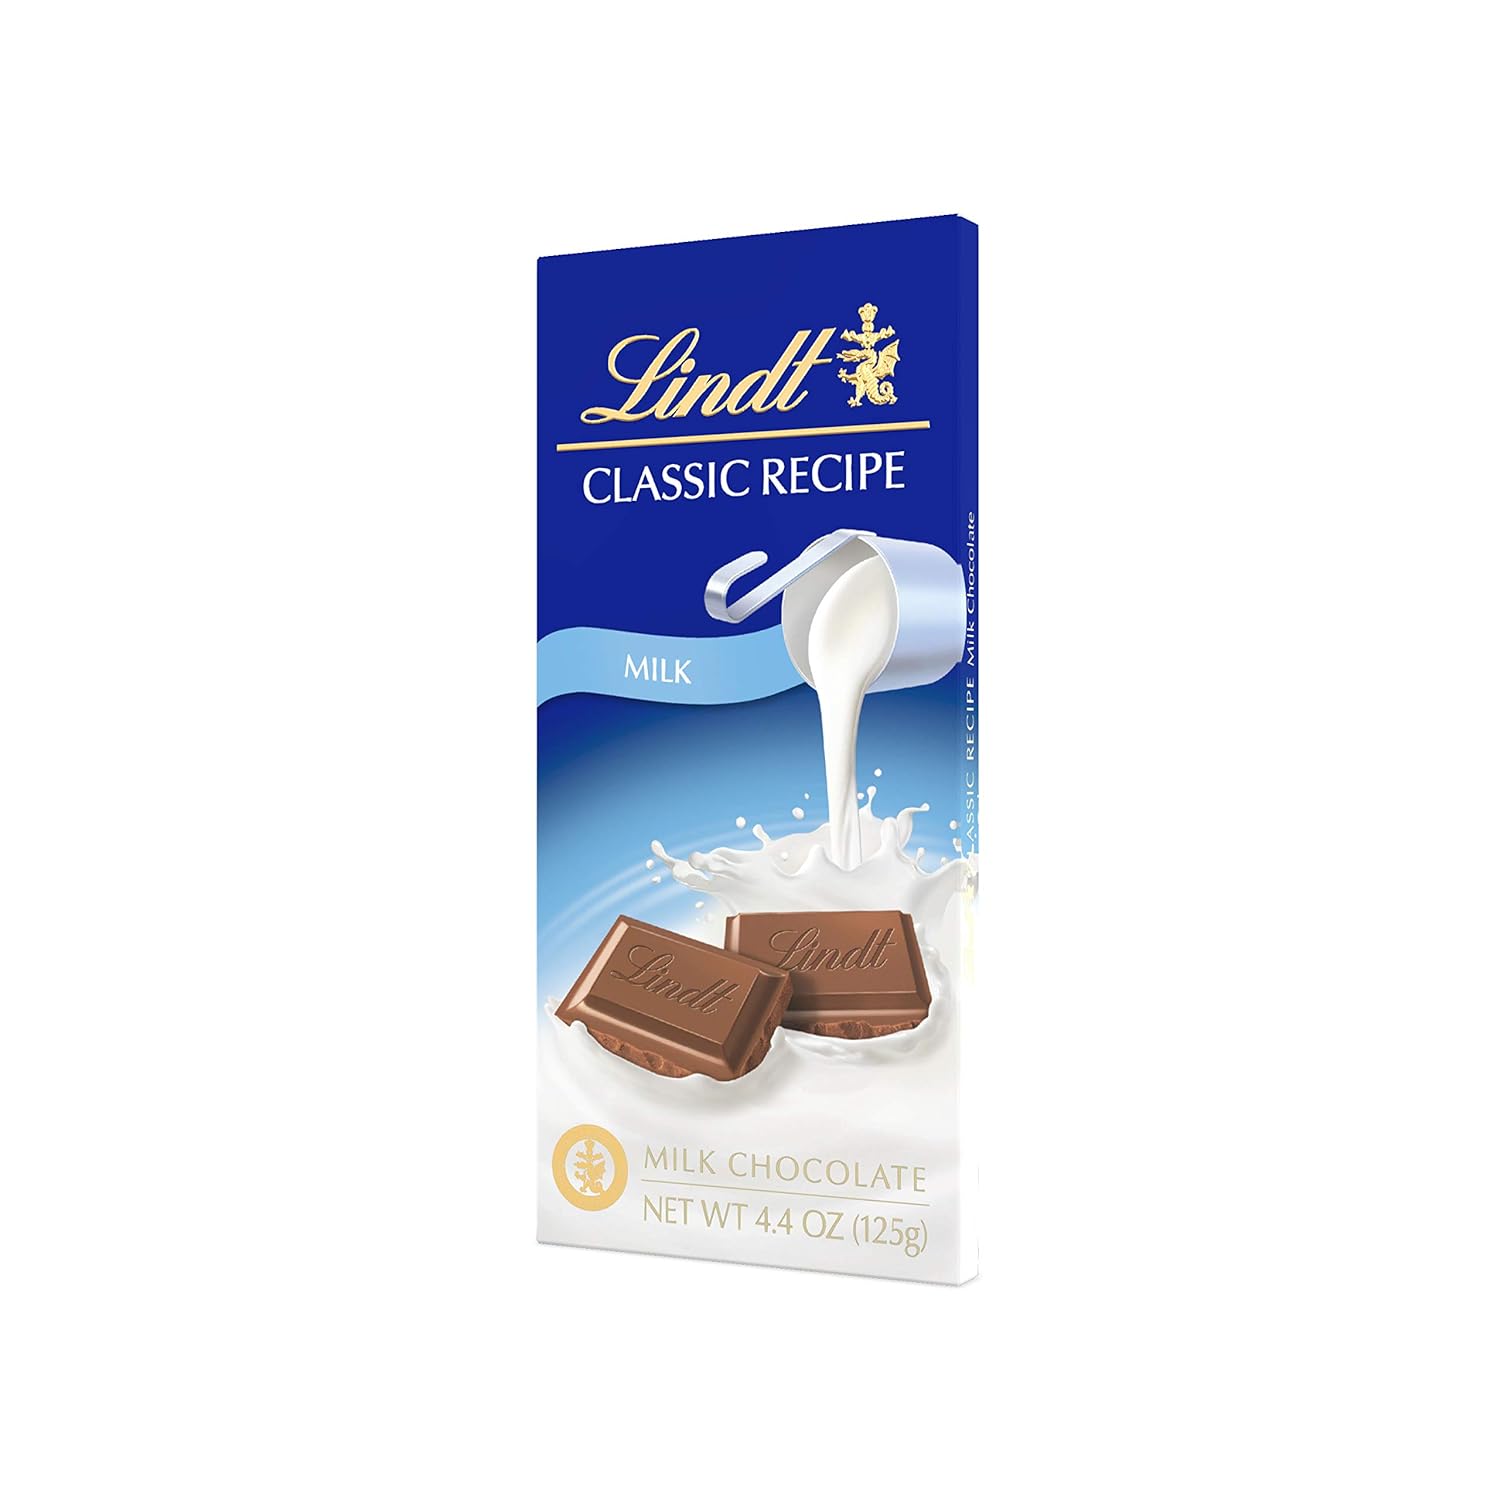  Lindt Classic Recipe Milk Chocolate Bar, 4.4 Ounce (Pack of 12), Packaging May Vary